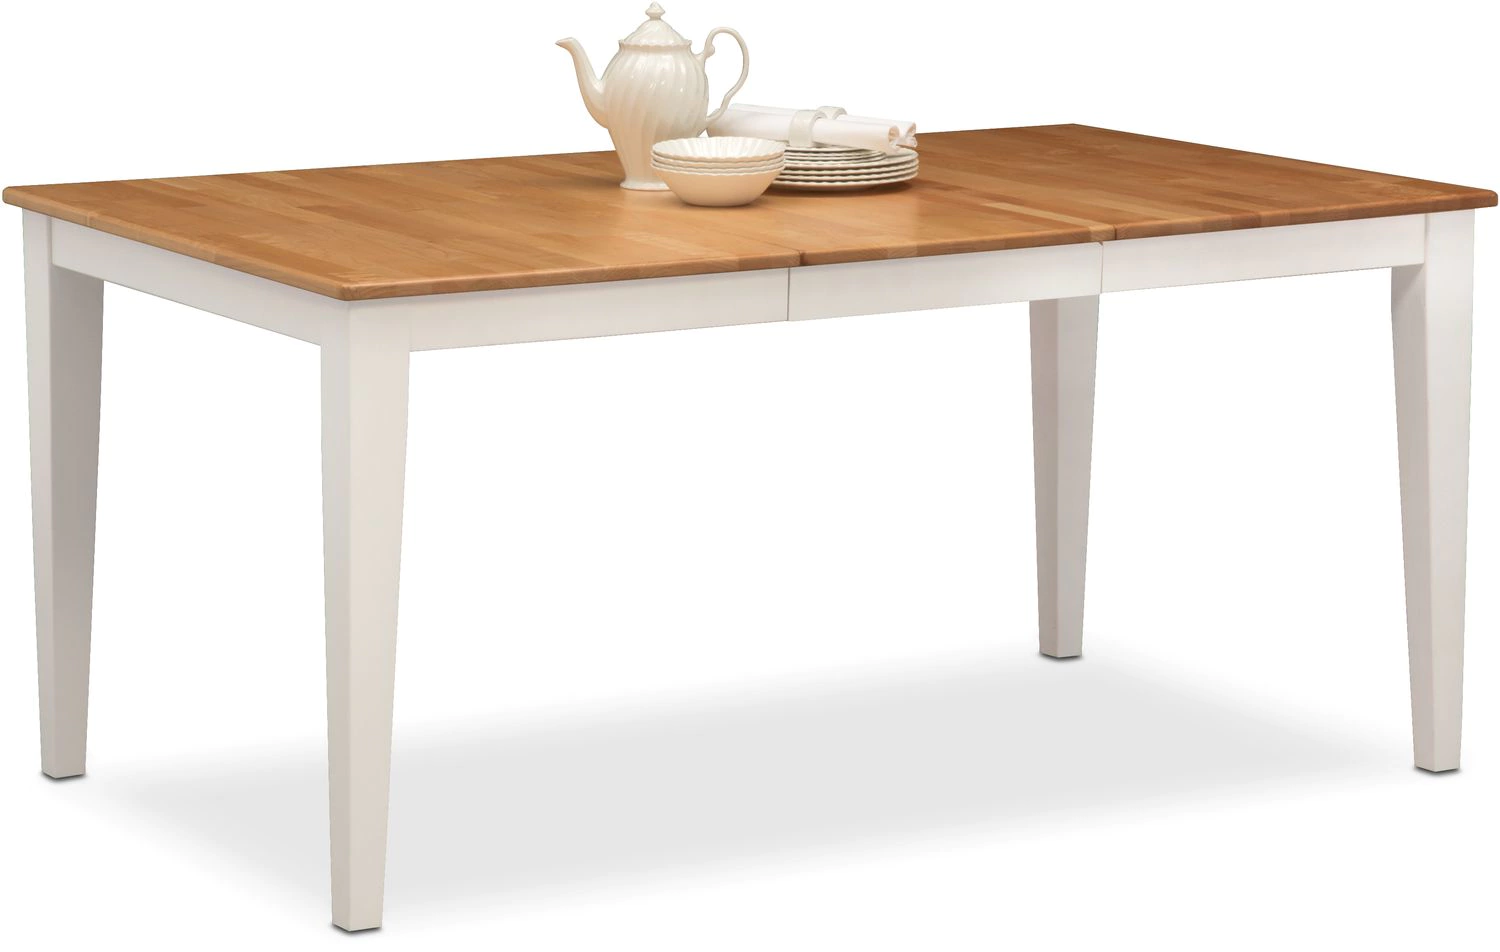 nantucket table maple and white value city furniture mattresses room essentials accent click change solid wood entry lobby chairs ikea lounge inch round end small console mirrored